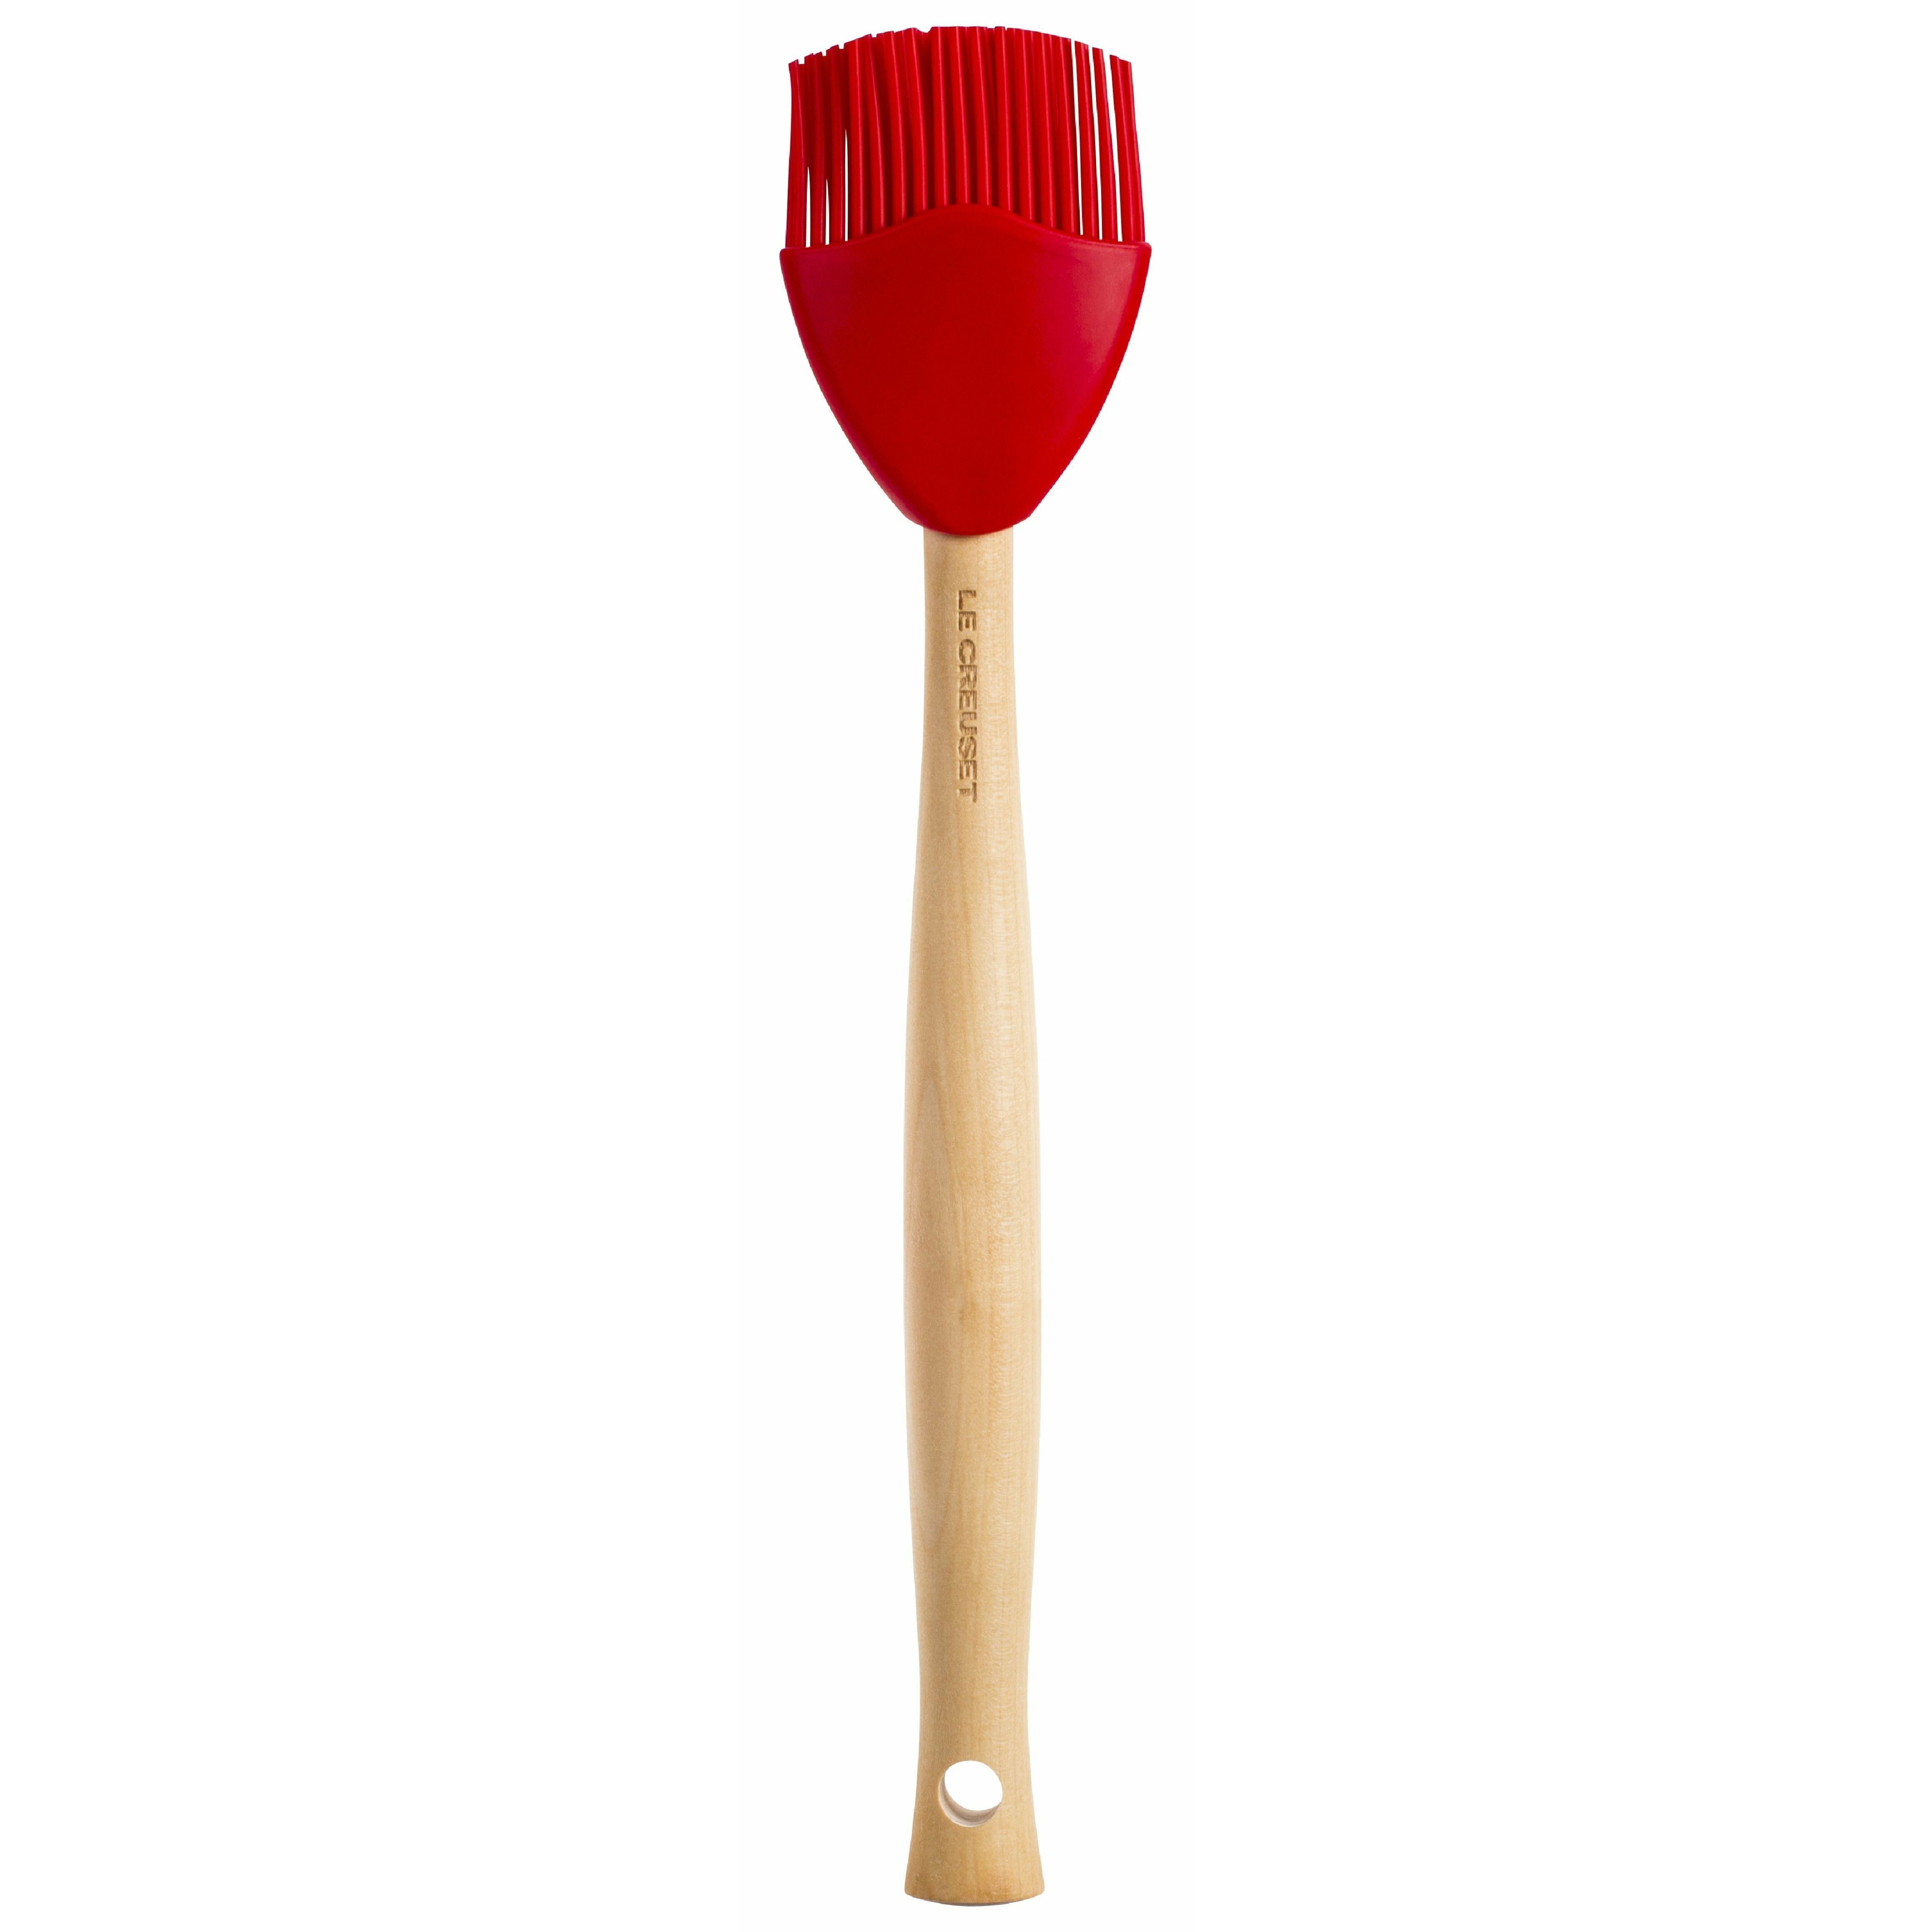 Le Creuset Baking Brush Craft, Cherry Red